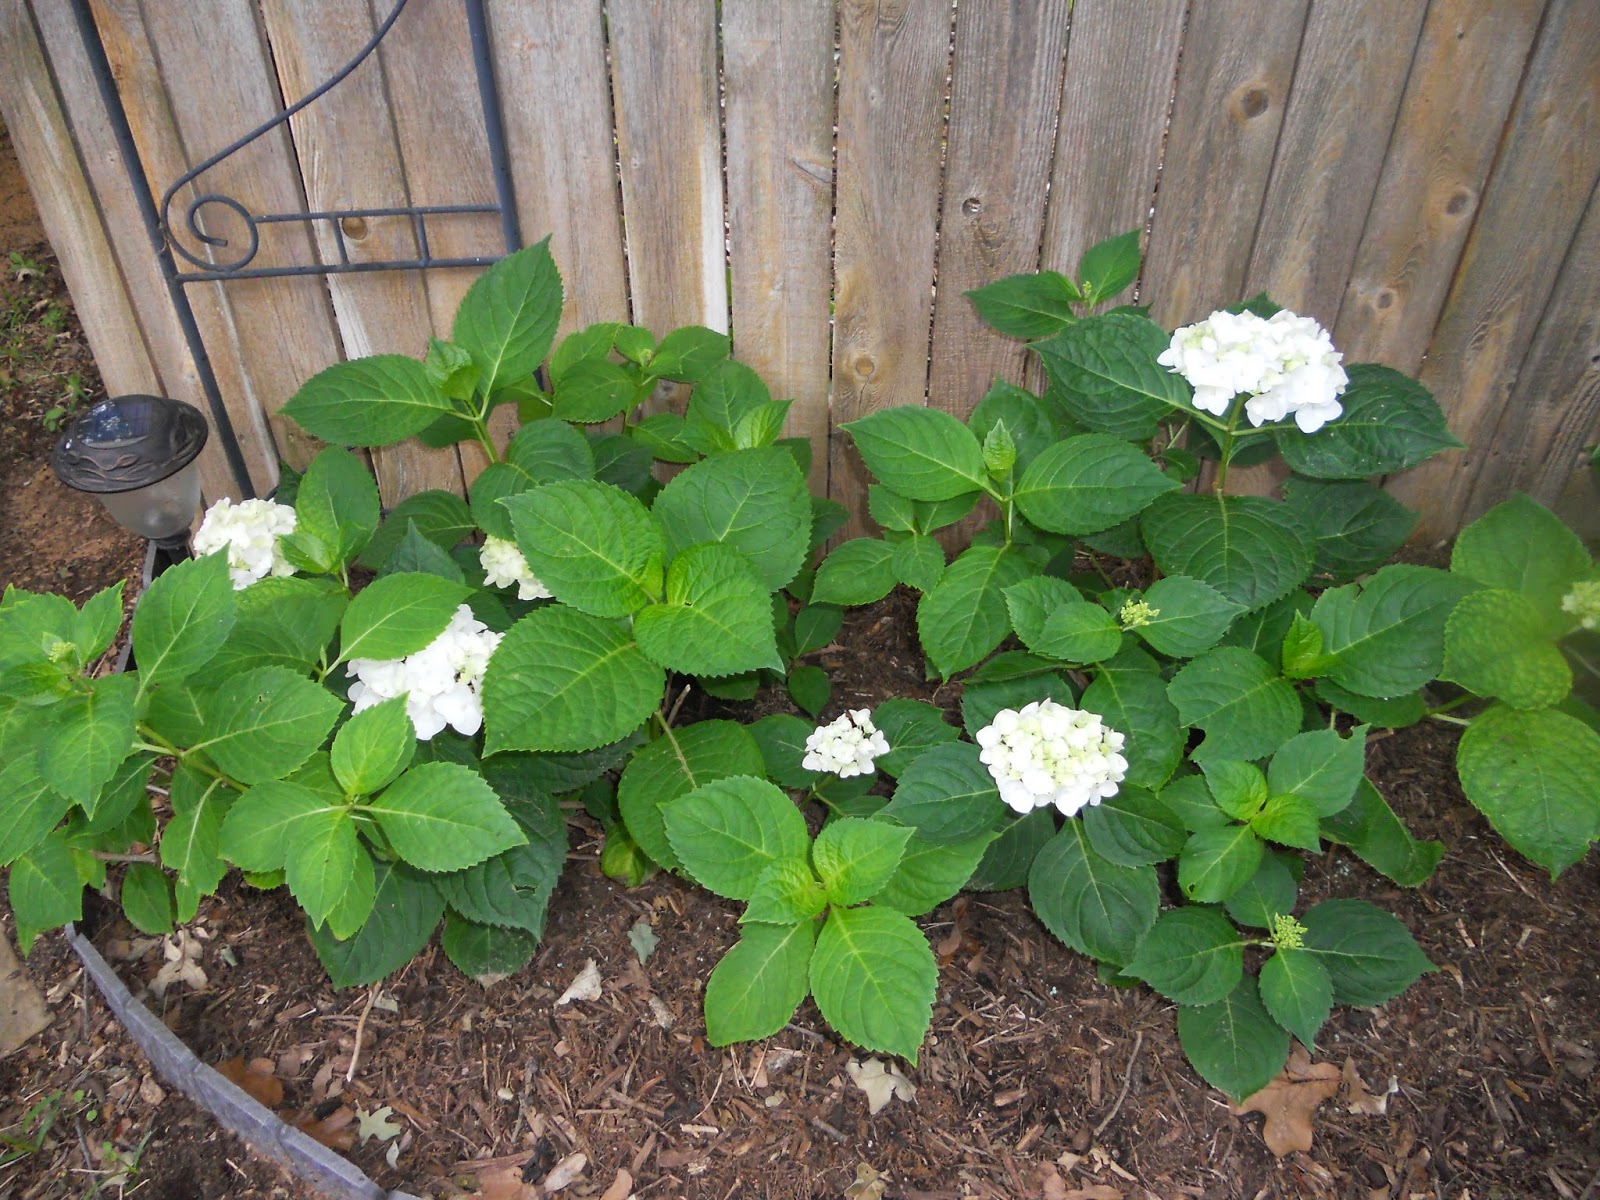  is from my first section of hydrangea shrubs  planted 23 years ago